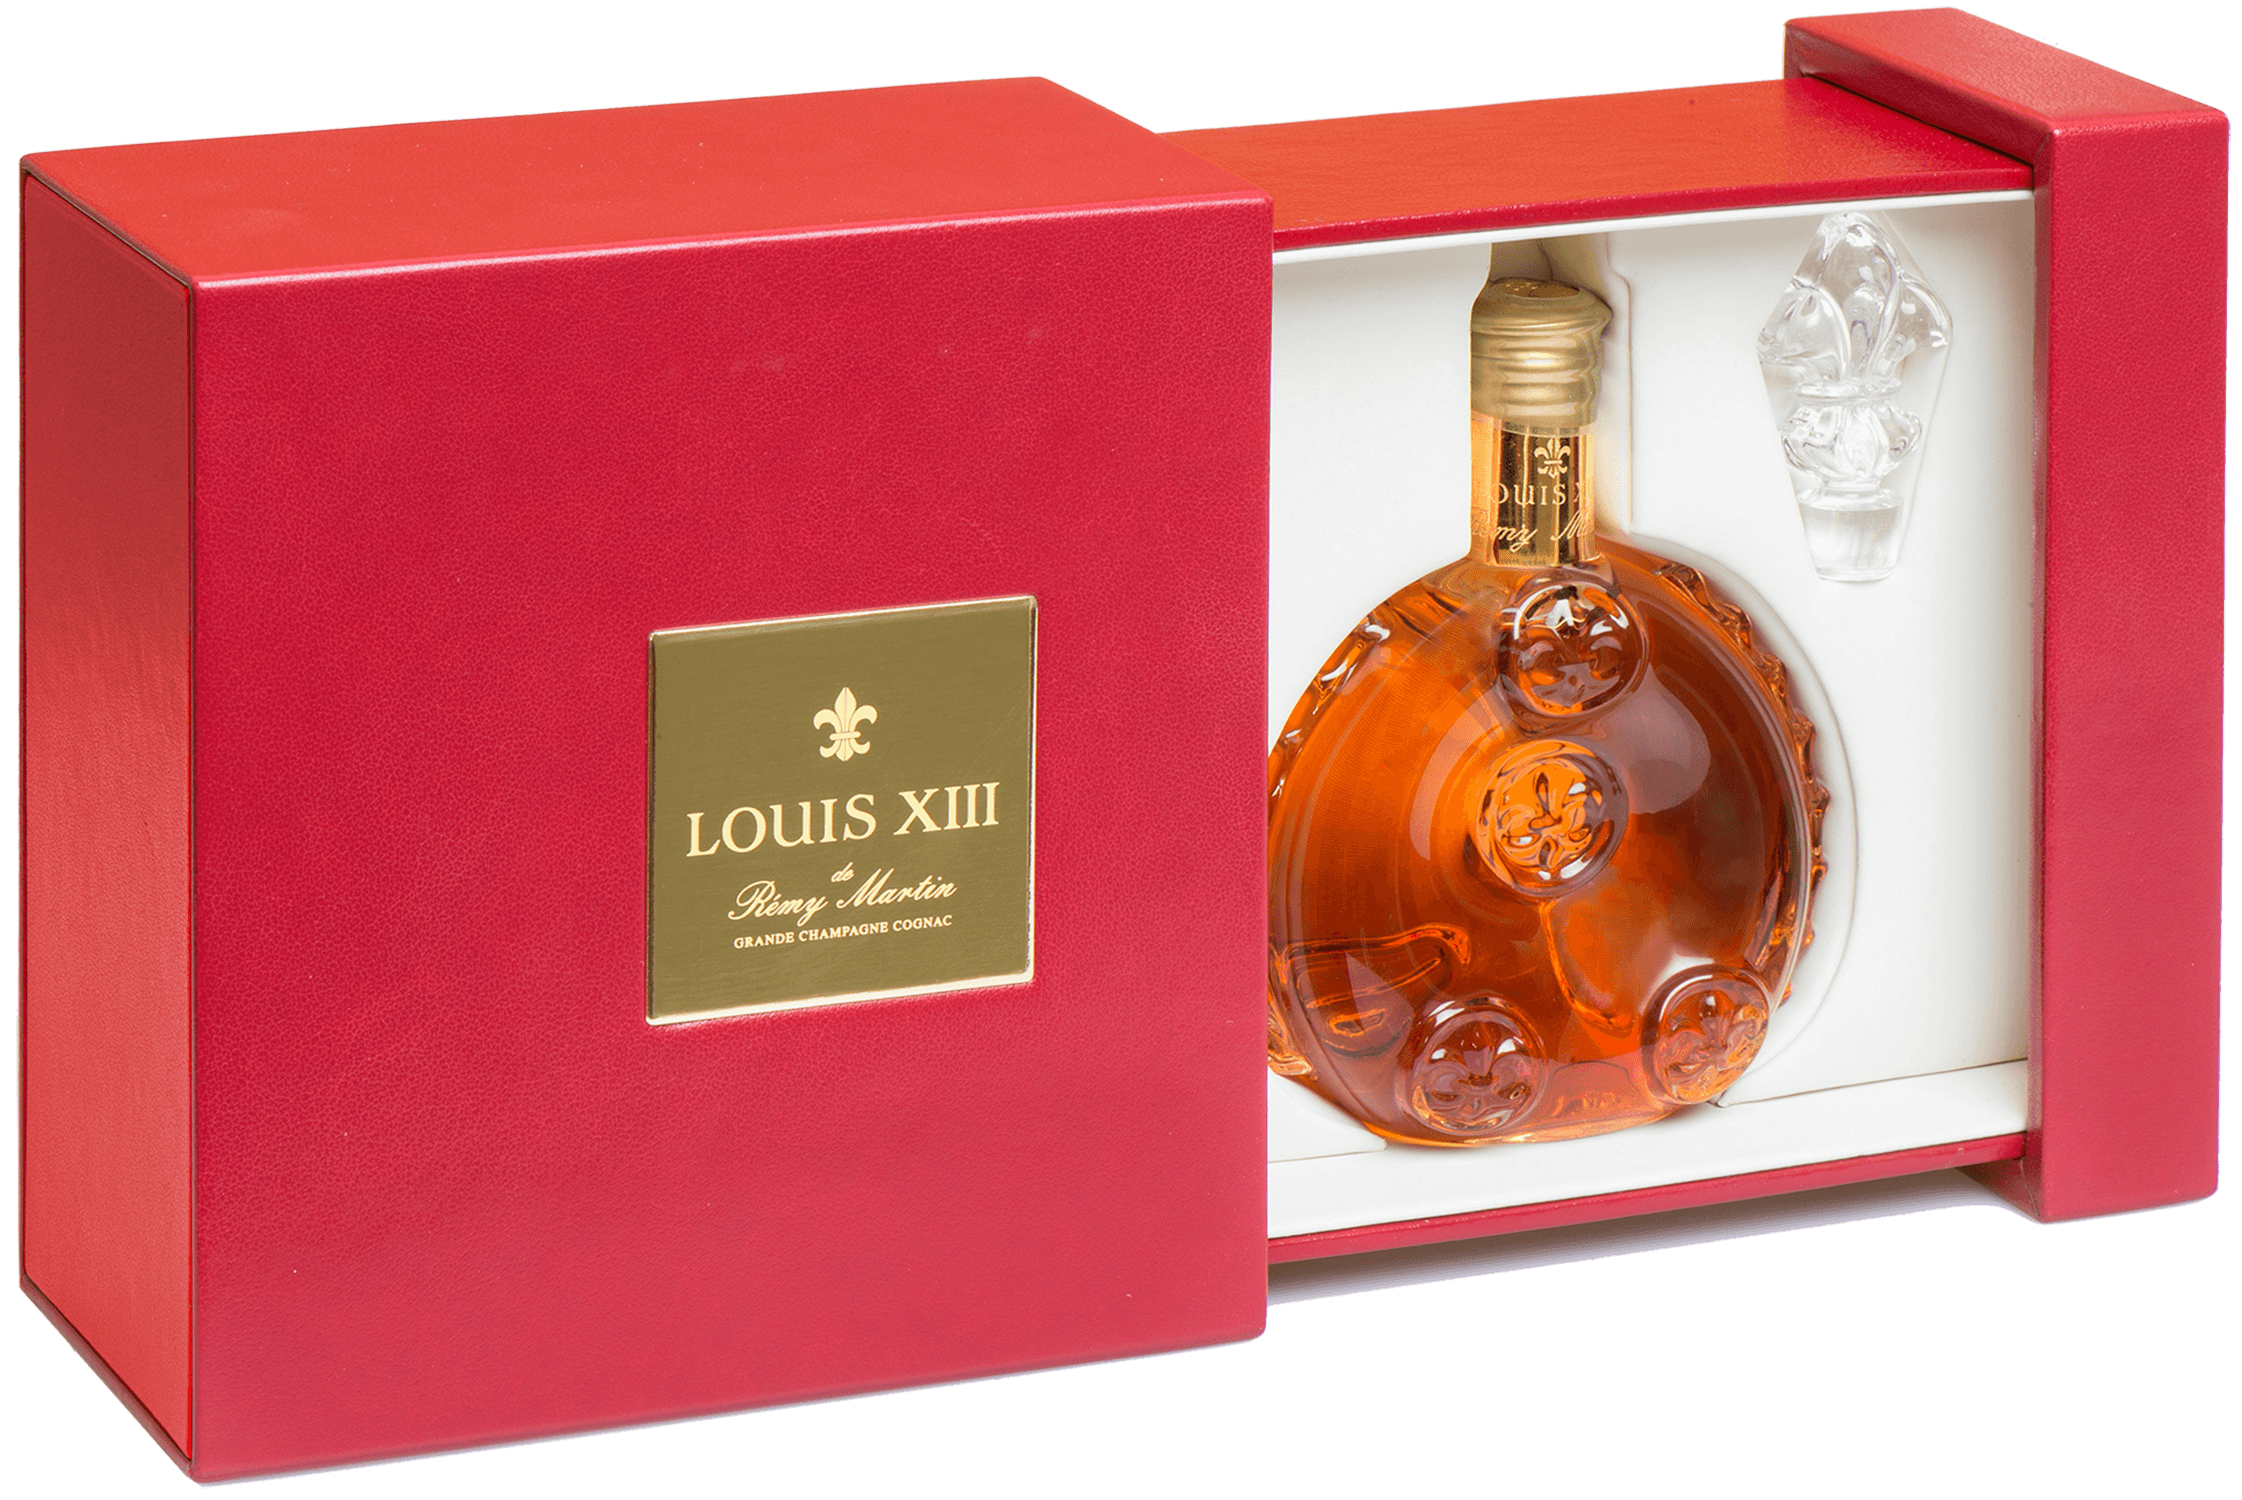 Remy Martin Louis XIII (gift box)